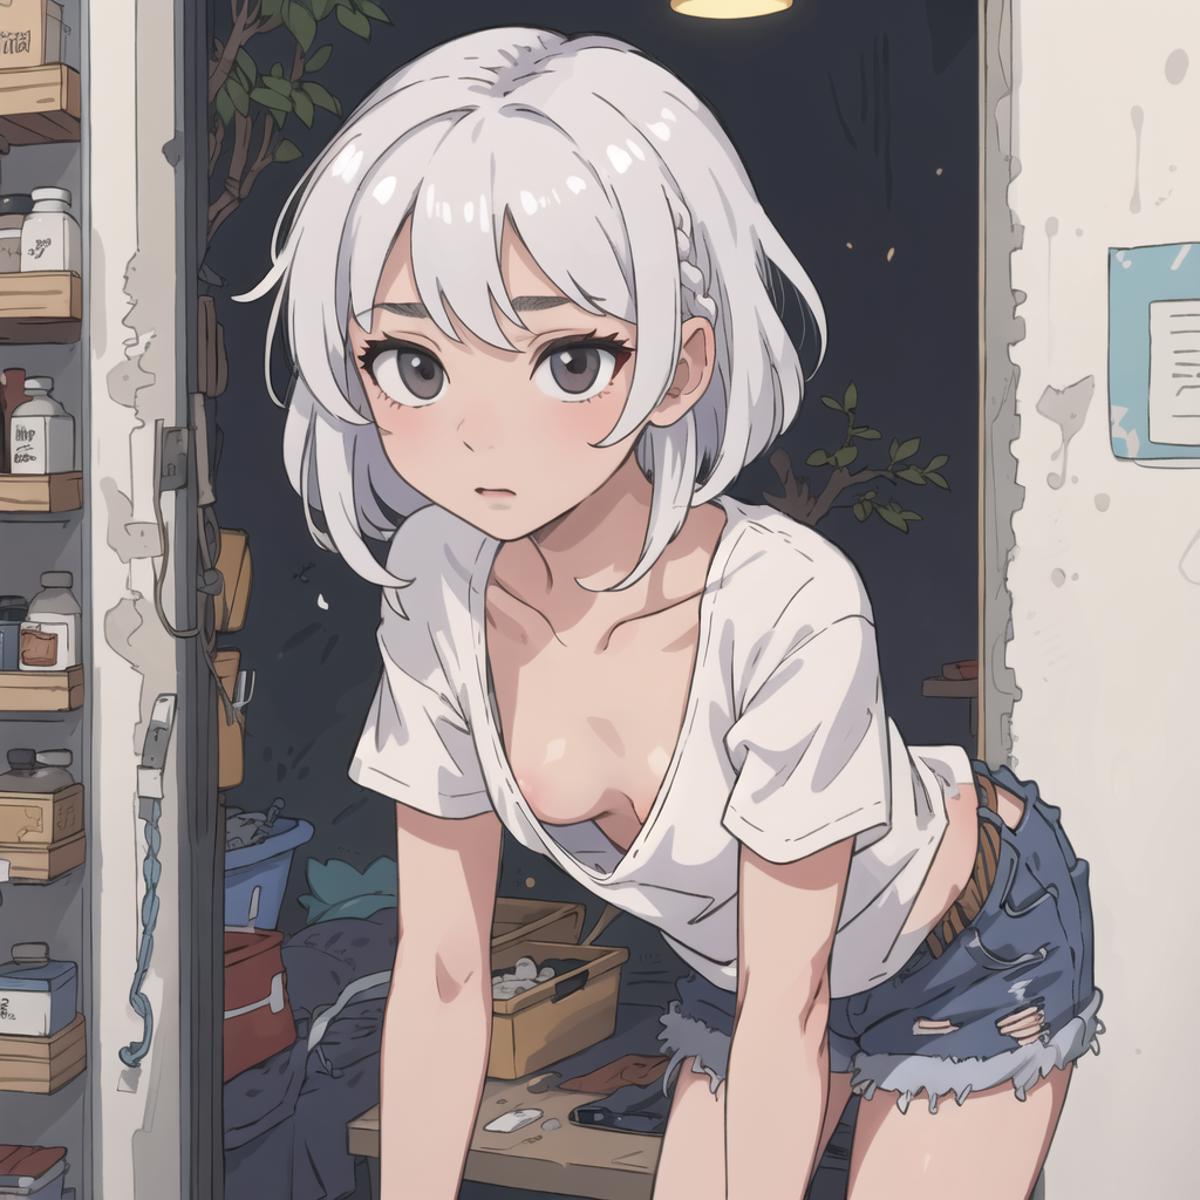 A cartoon illustration of a white-haired girl wearing a white shirt and jean shorts.